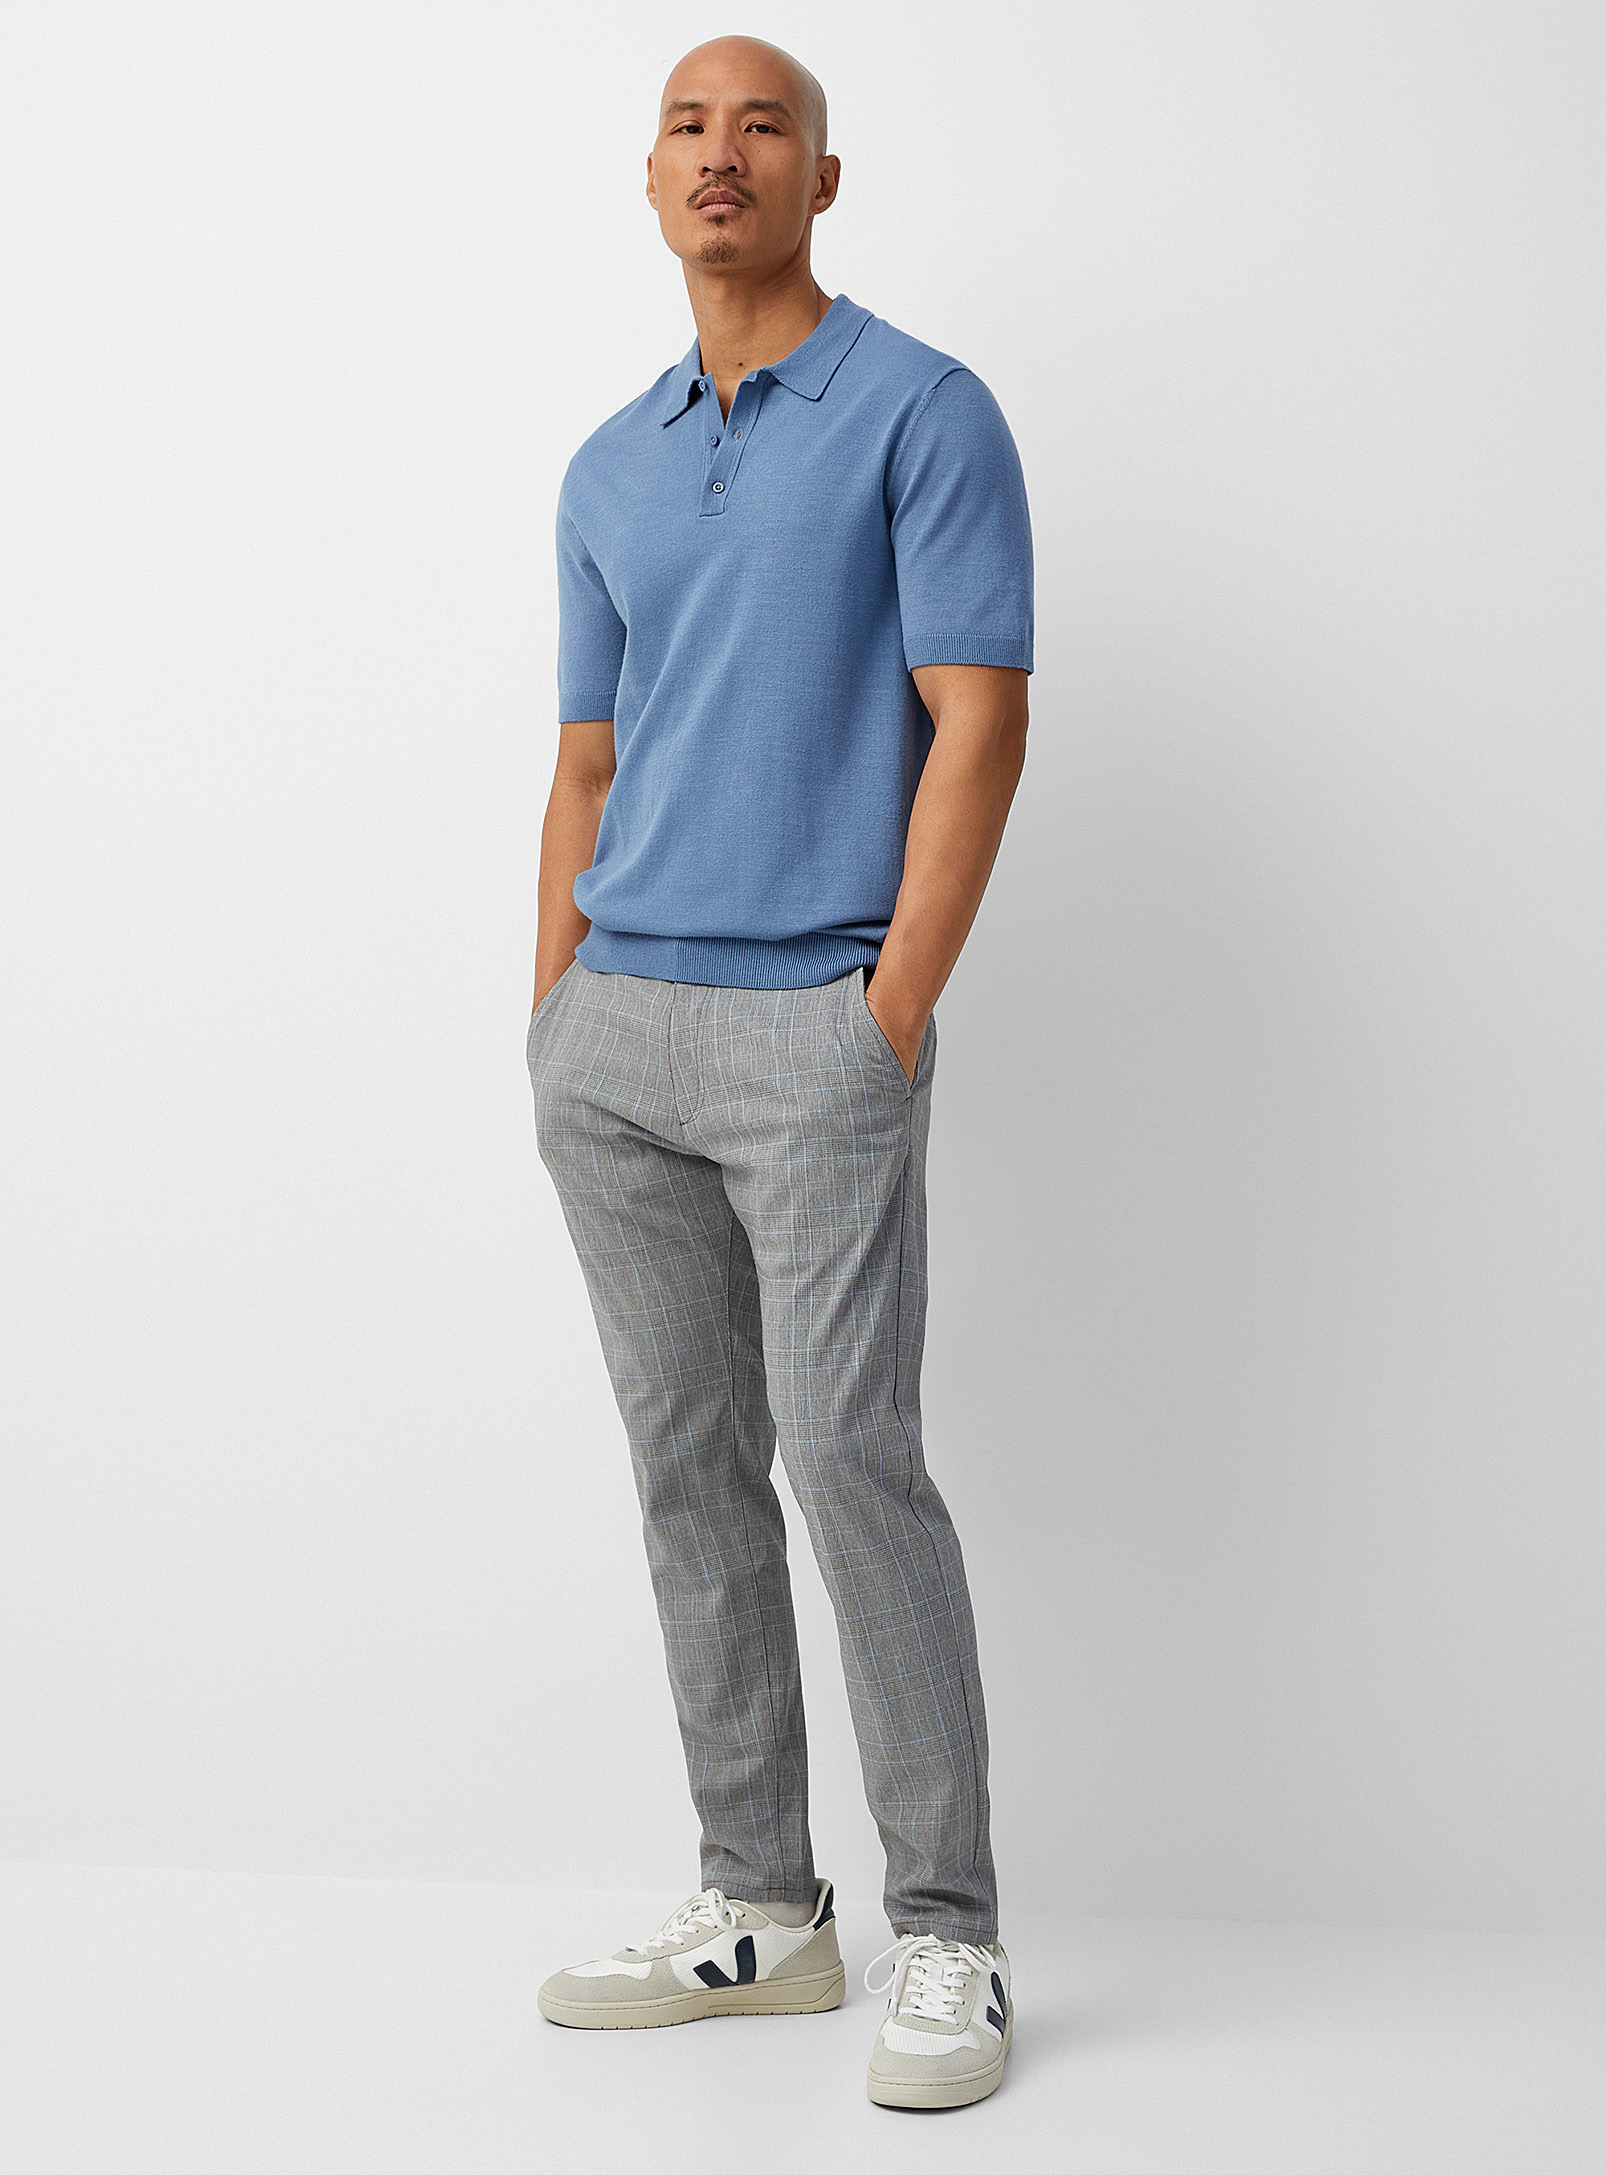 Projek Raw - Men's Blue-accent Prince of Wales stretch pant Slim fit